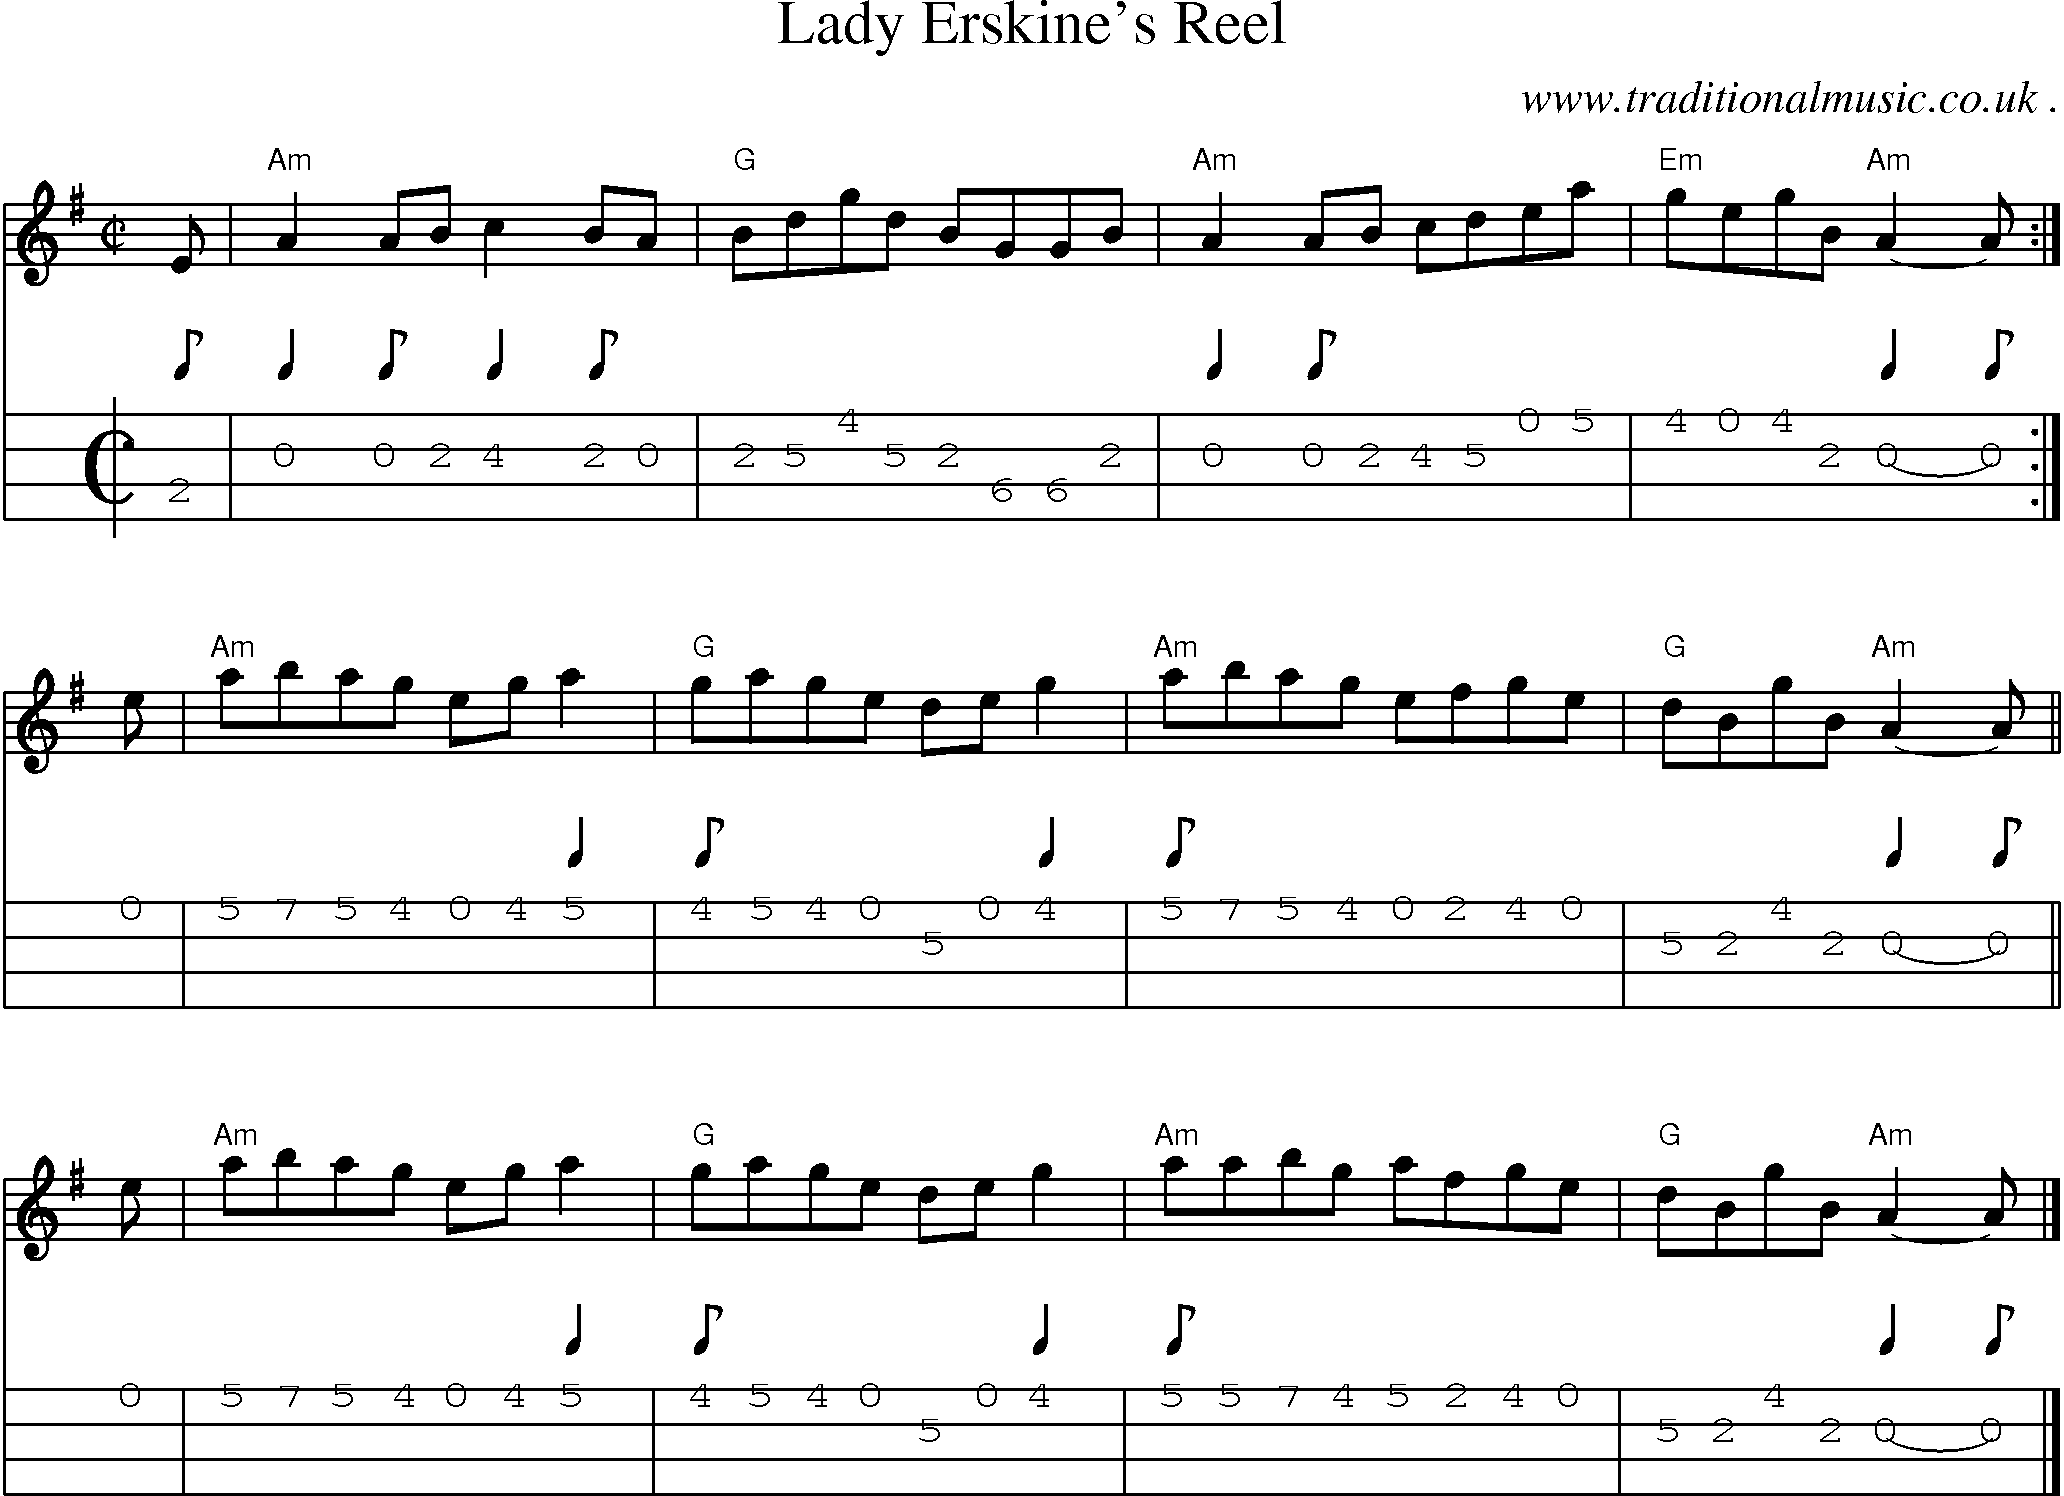 Sheet-music  score, Chords and Mandolin Tabs for Lady Erskines Reel